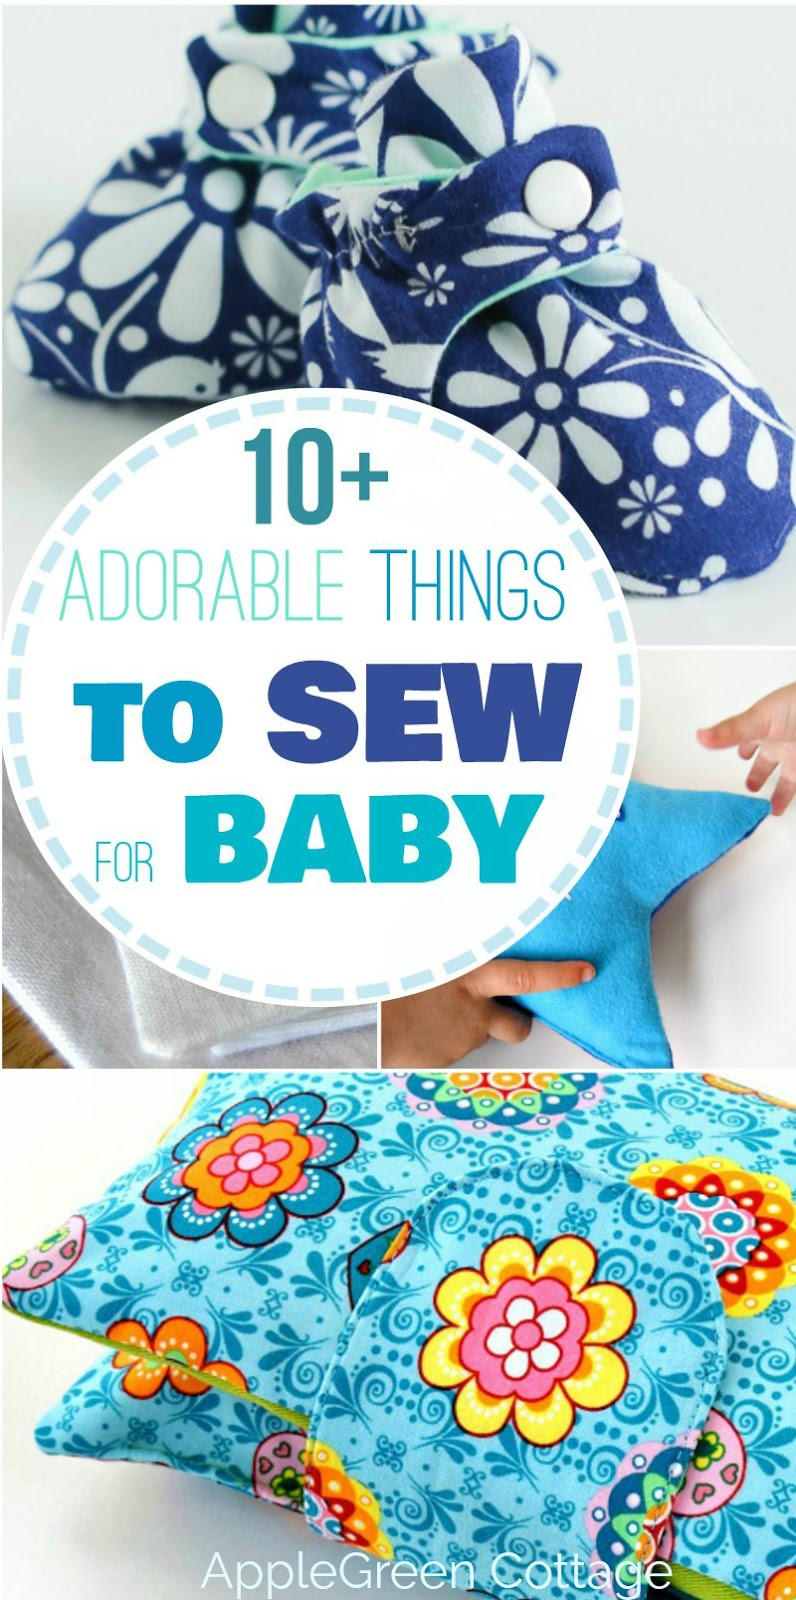 DIY Baby Sewing Projects
 10 Adorable Things To Sew For Baby AppleGreen Cottage